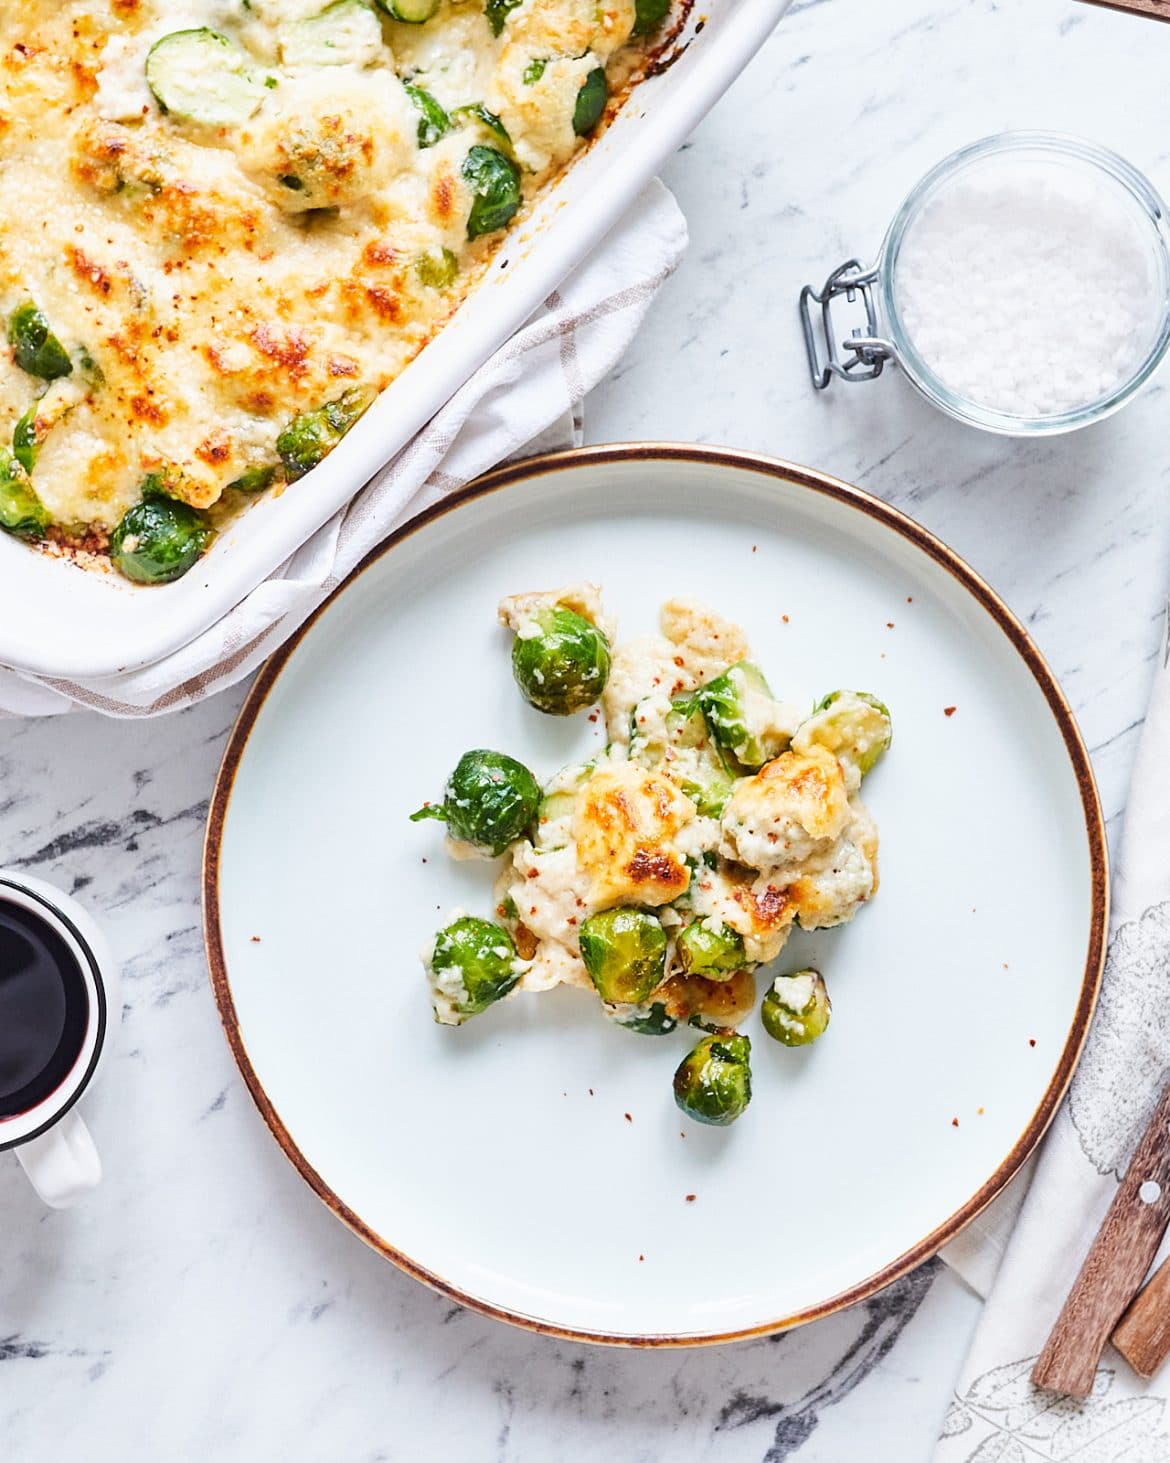 Crispy and Cheesy Brussel Sprouts